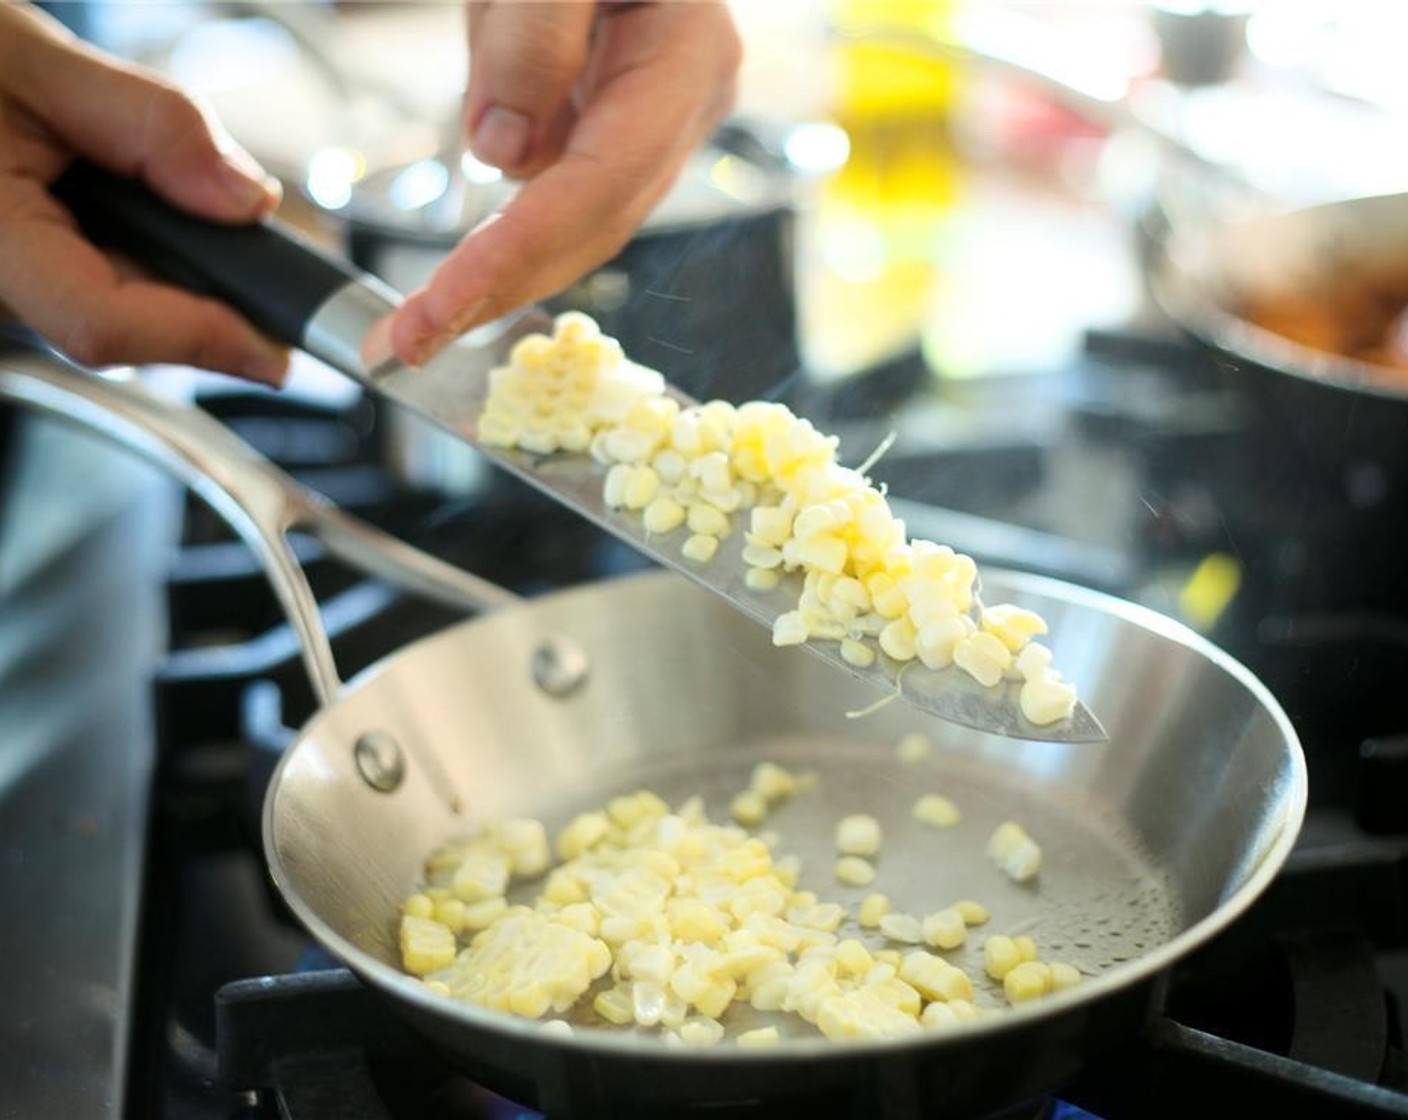 step 14 Heat a small saute pan over medium heat with Extra-Virgin Olive Oil (1 tsp). Add corn kernels and cook until golden brown.